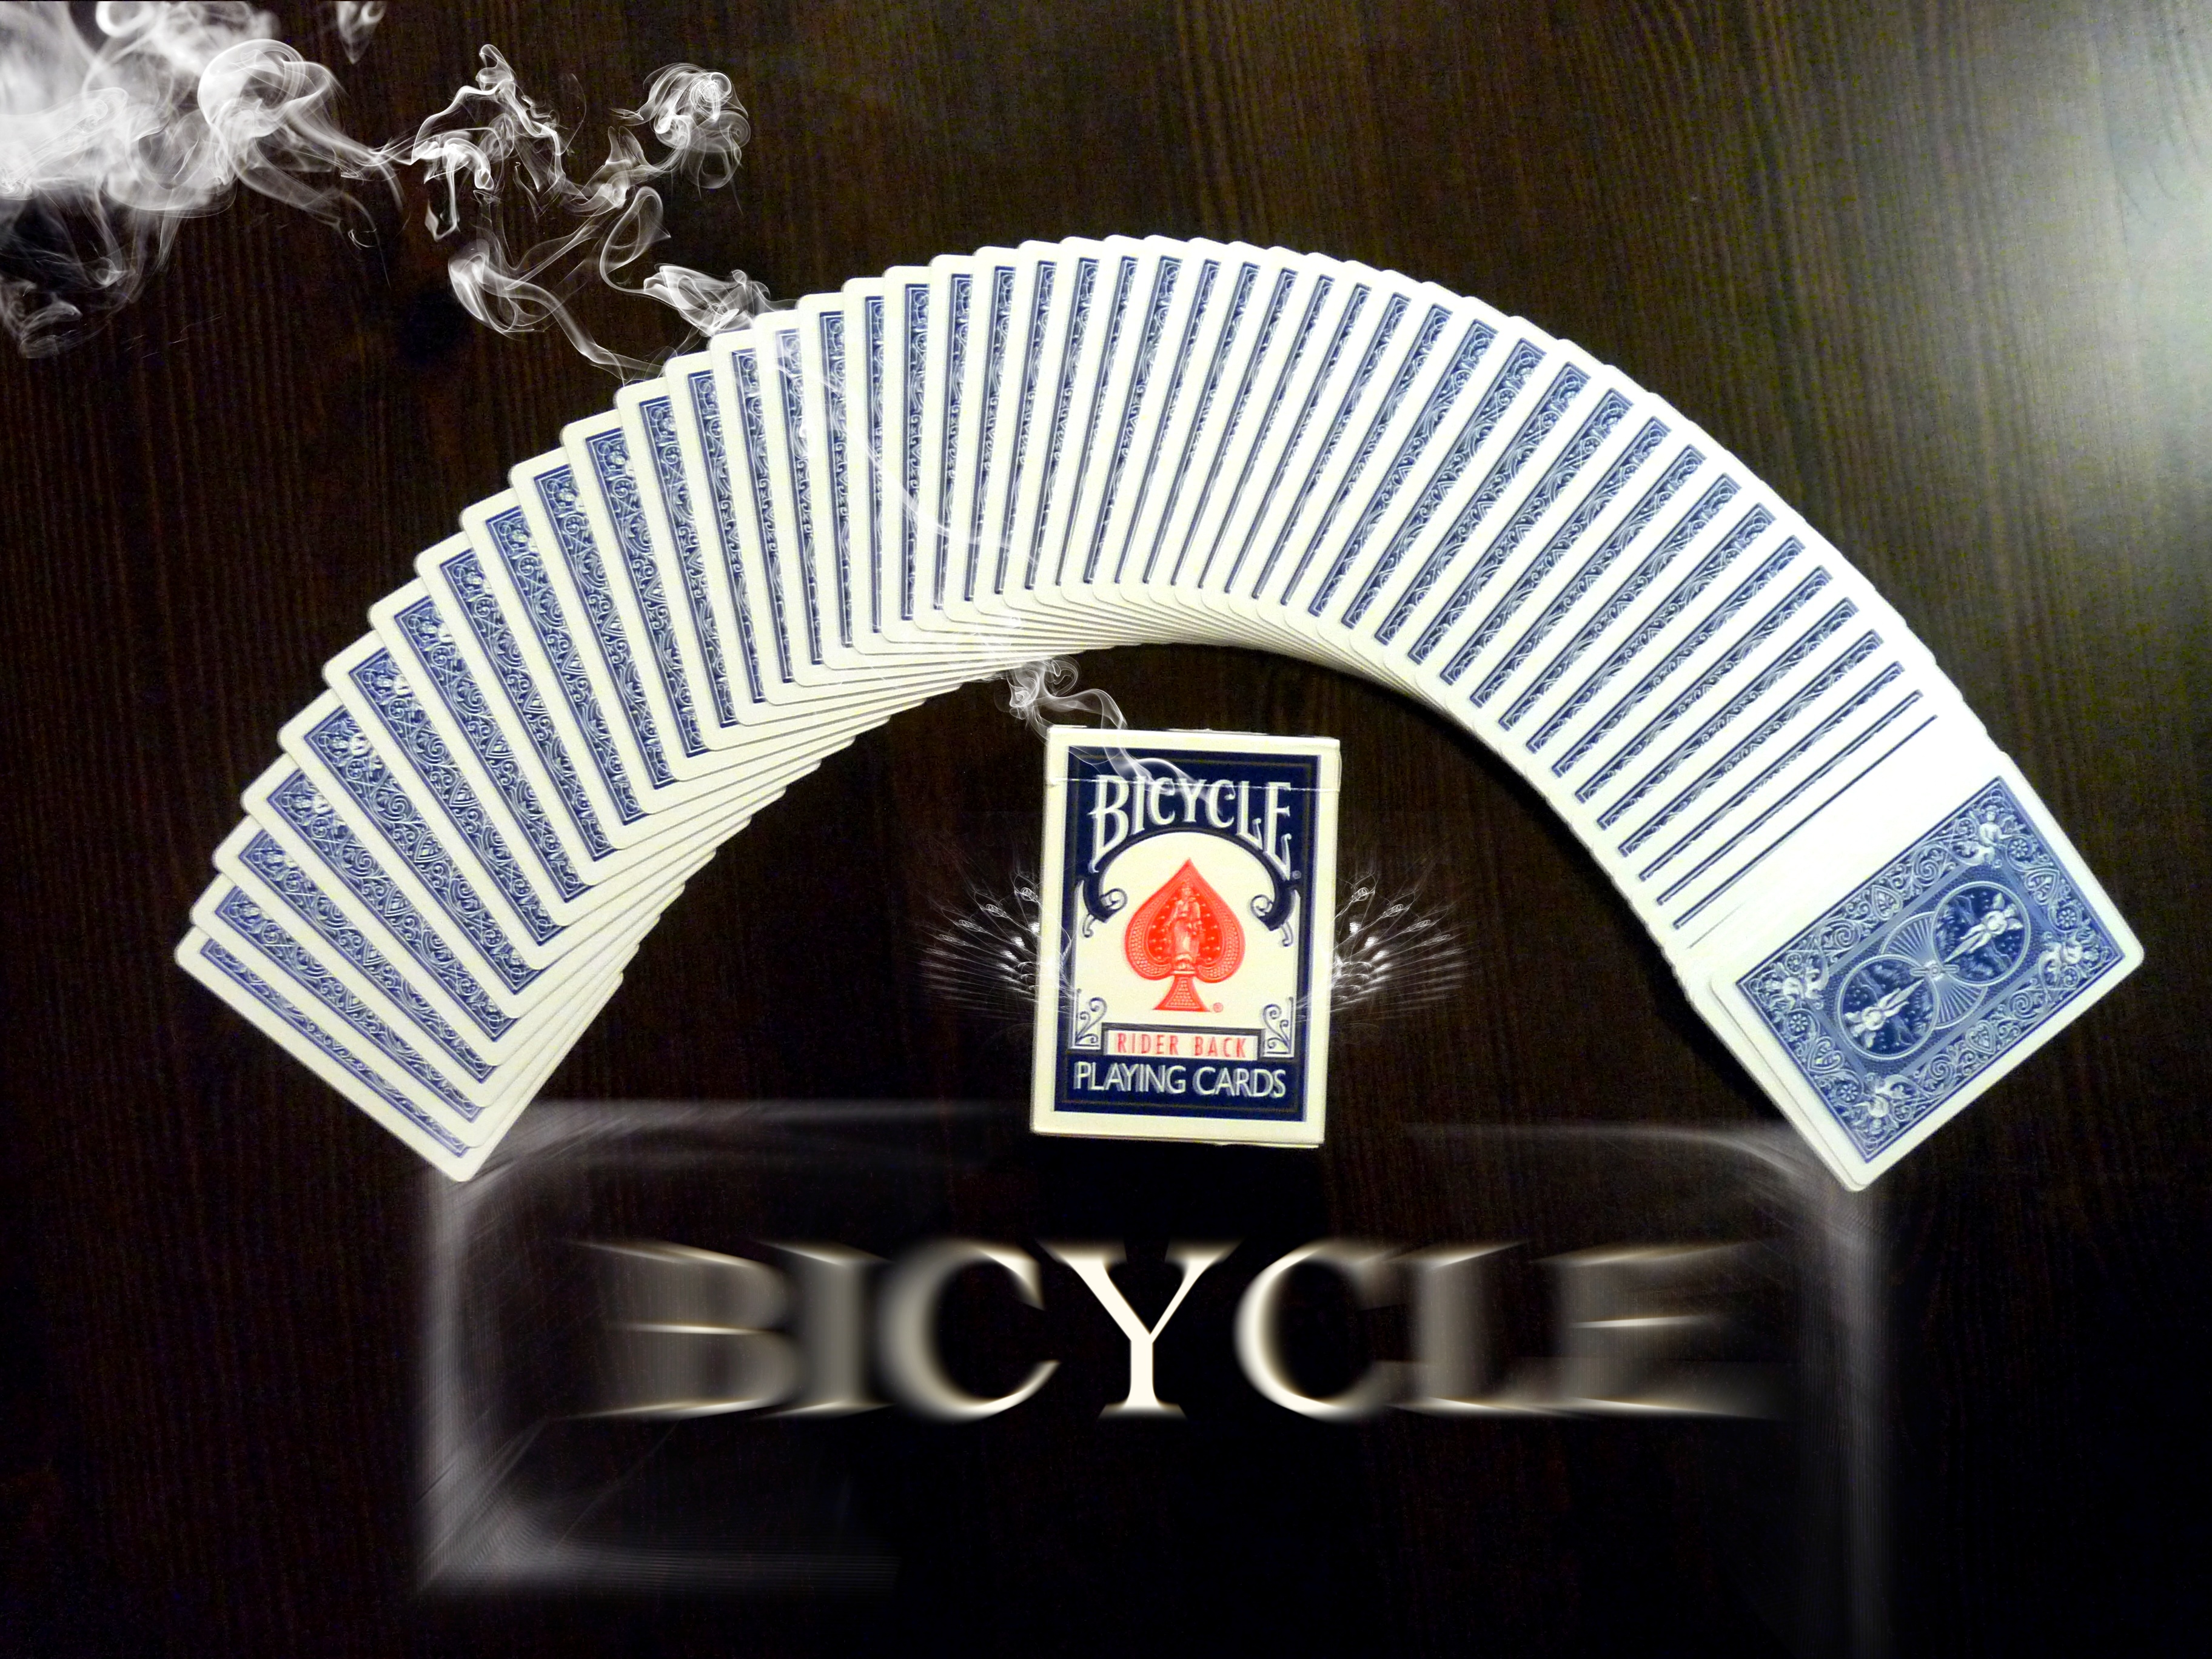 Bicycle Cards Wallpaper Image Gallery